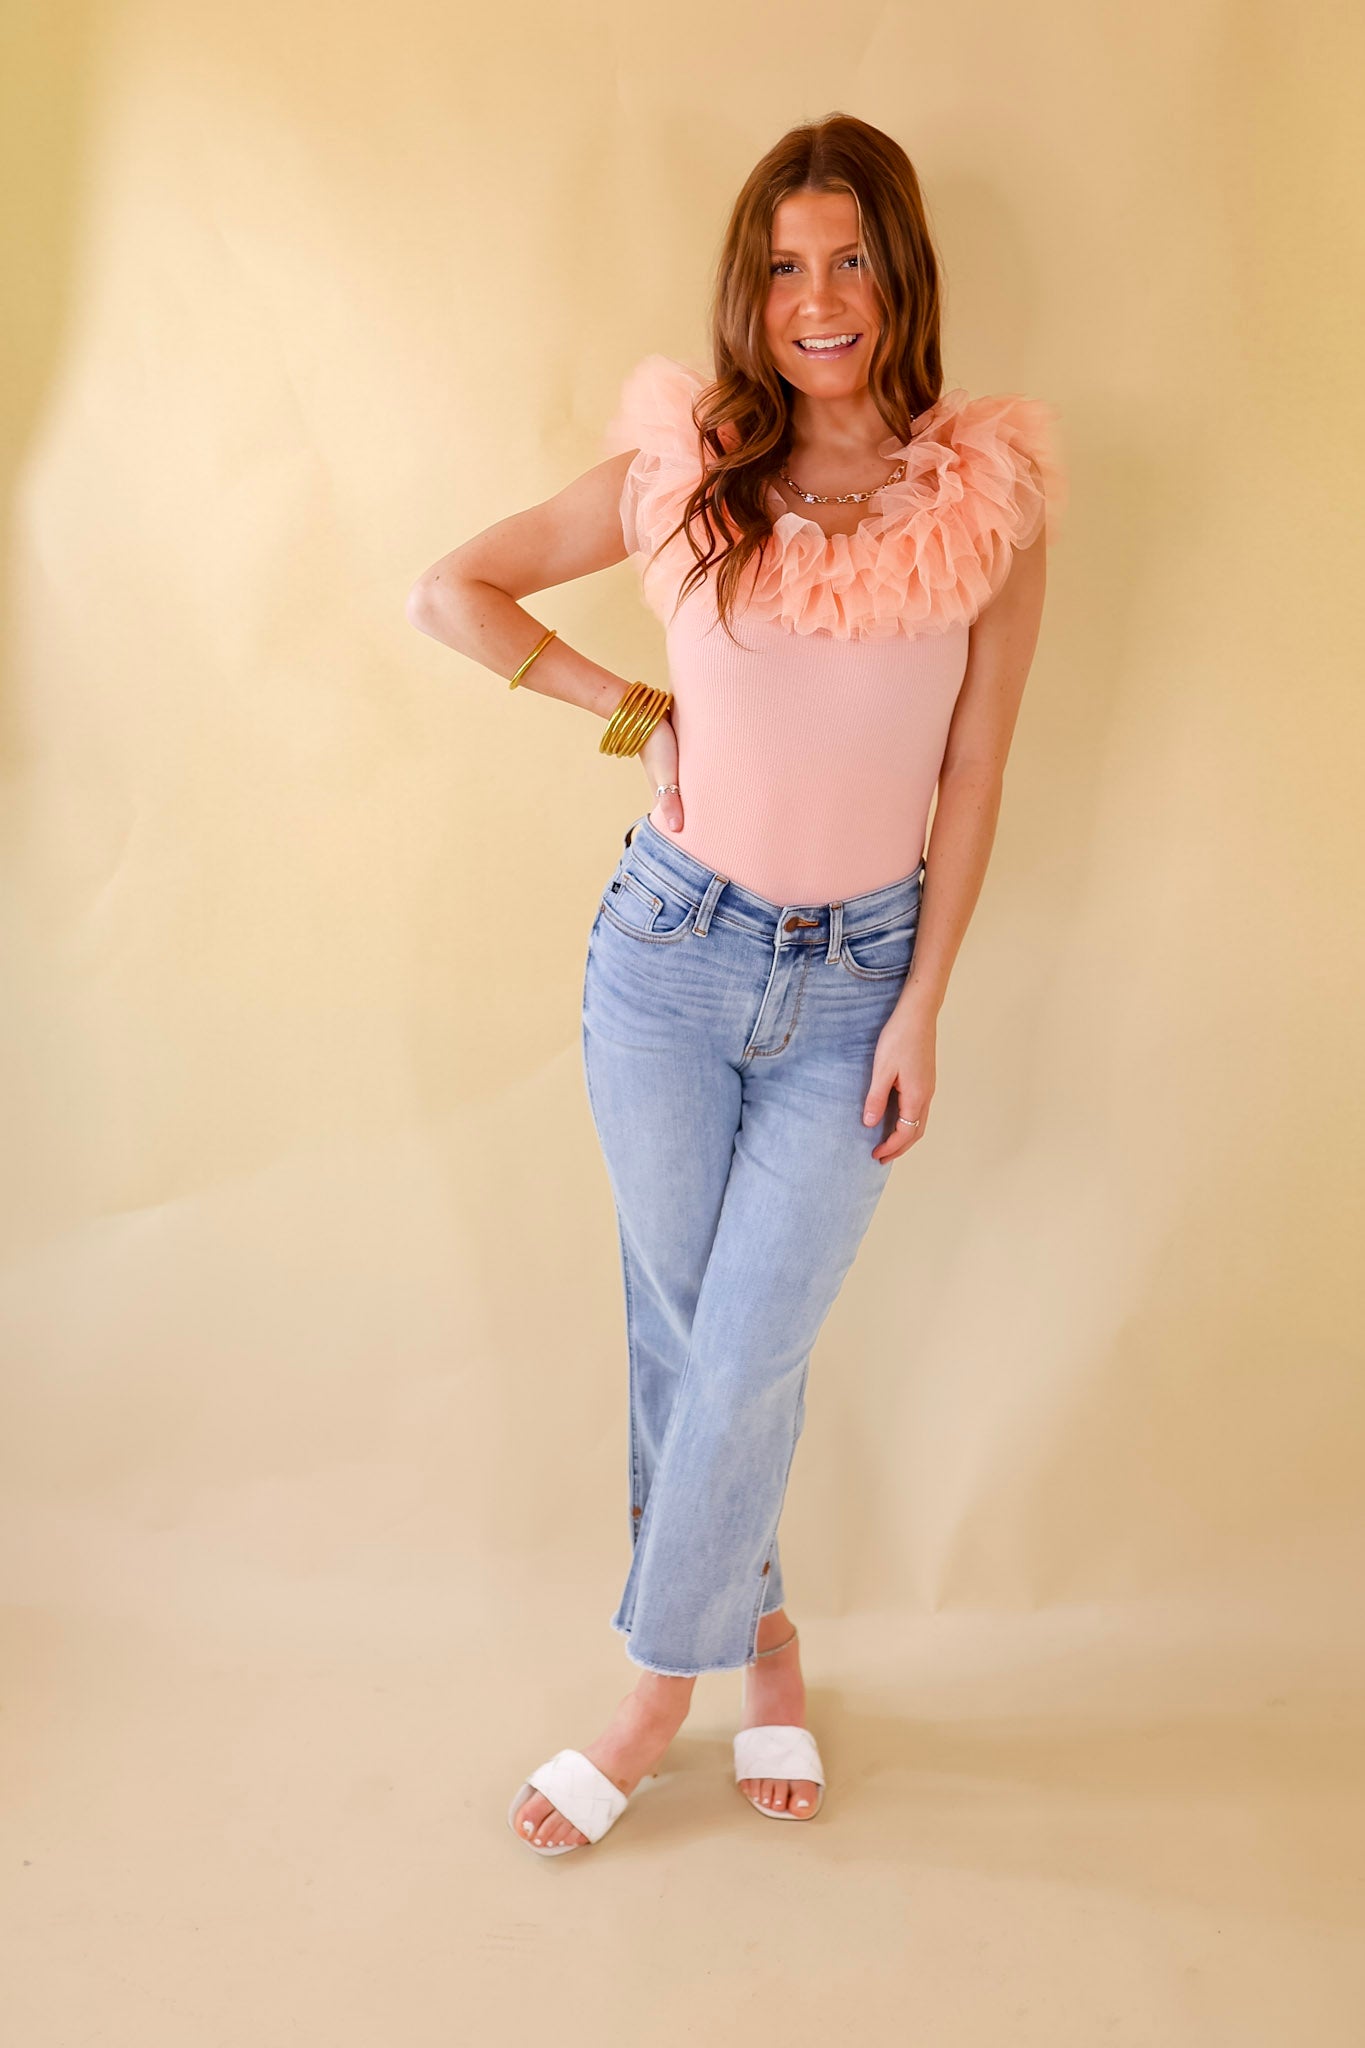 Pose For The Camera Tulle Upper Bodysuit in Coral Pink - Giddy Up Glamour Boutique